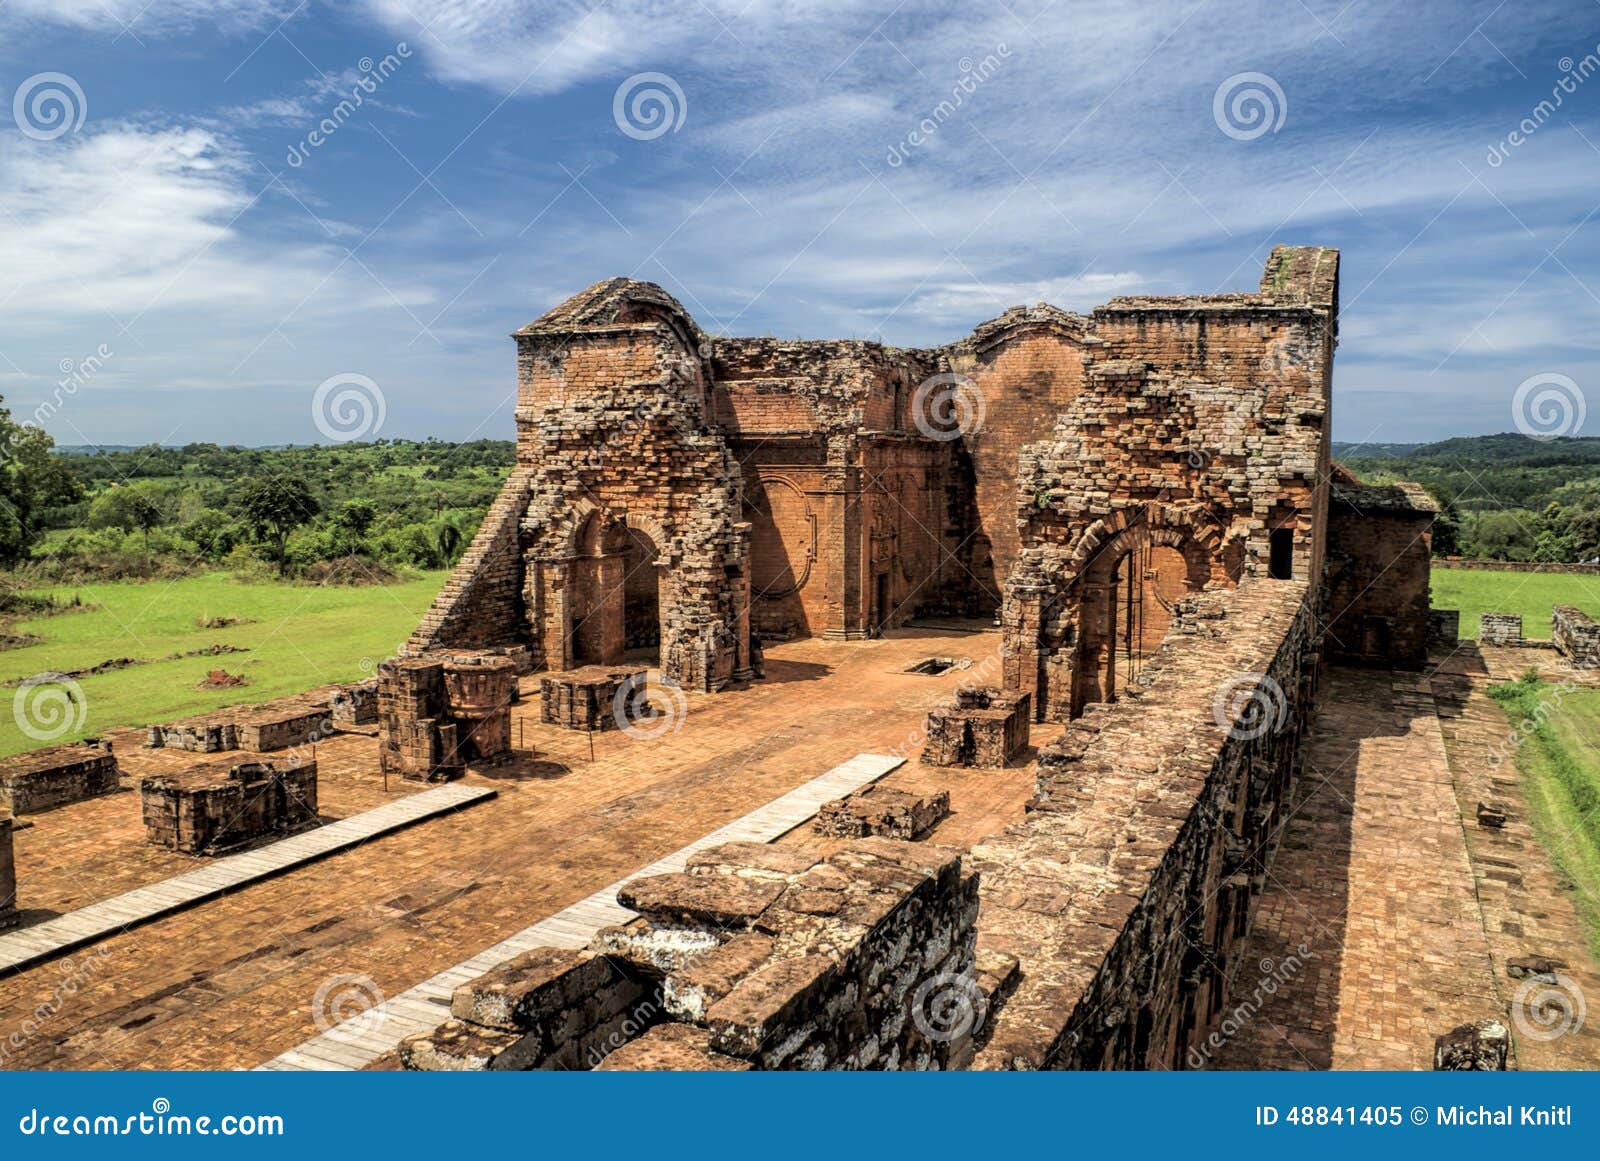 encarnacion and jesuit ruins in paraguay